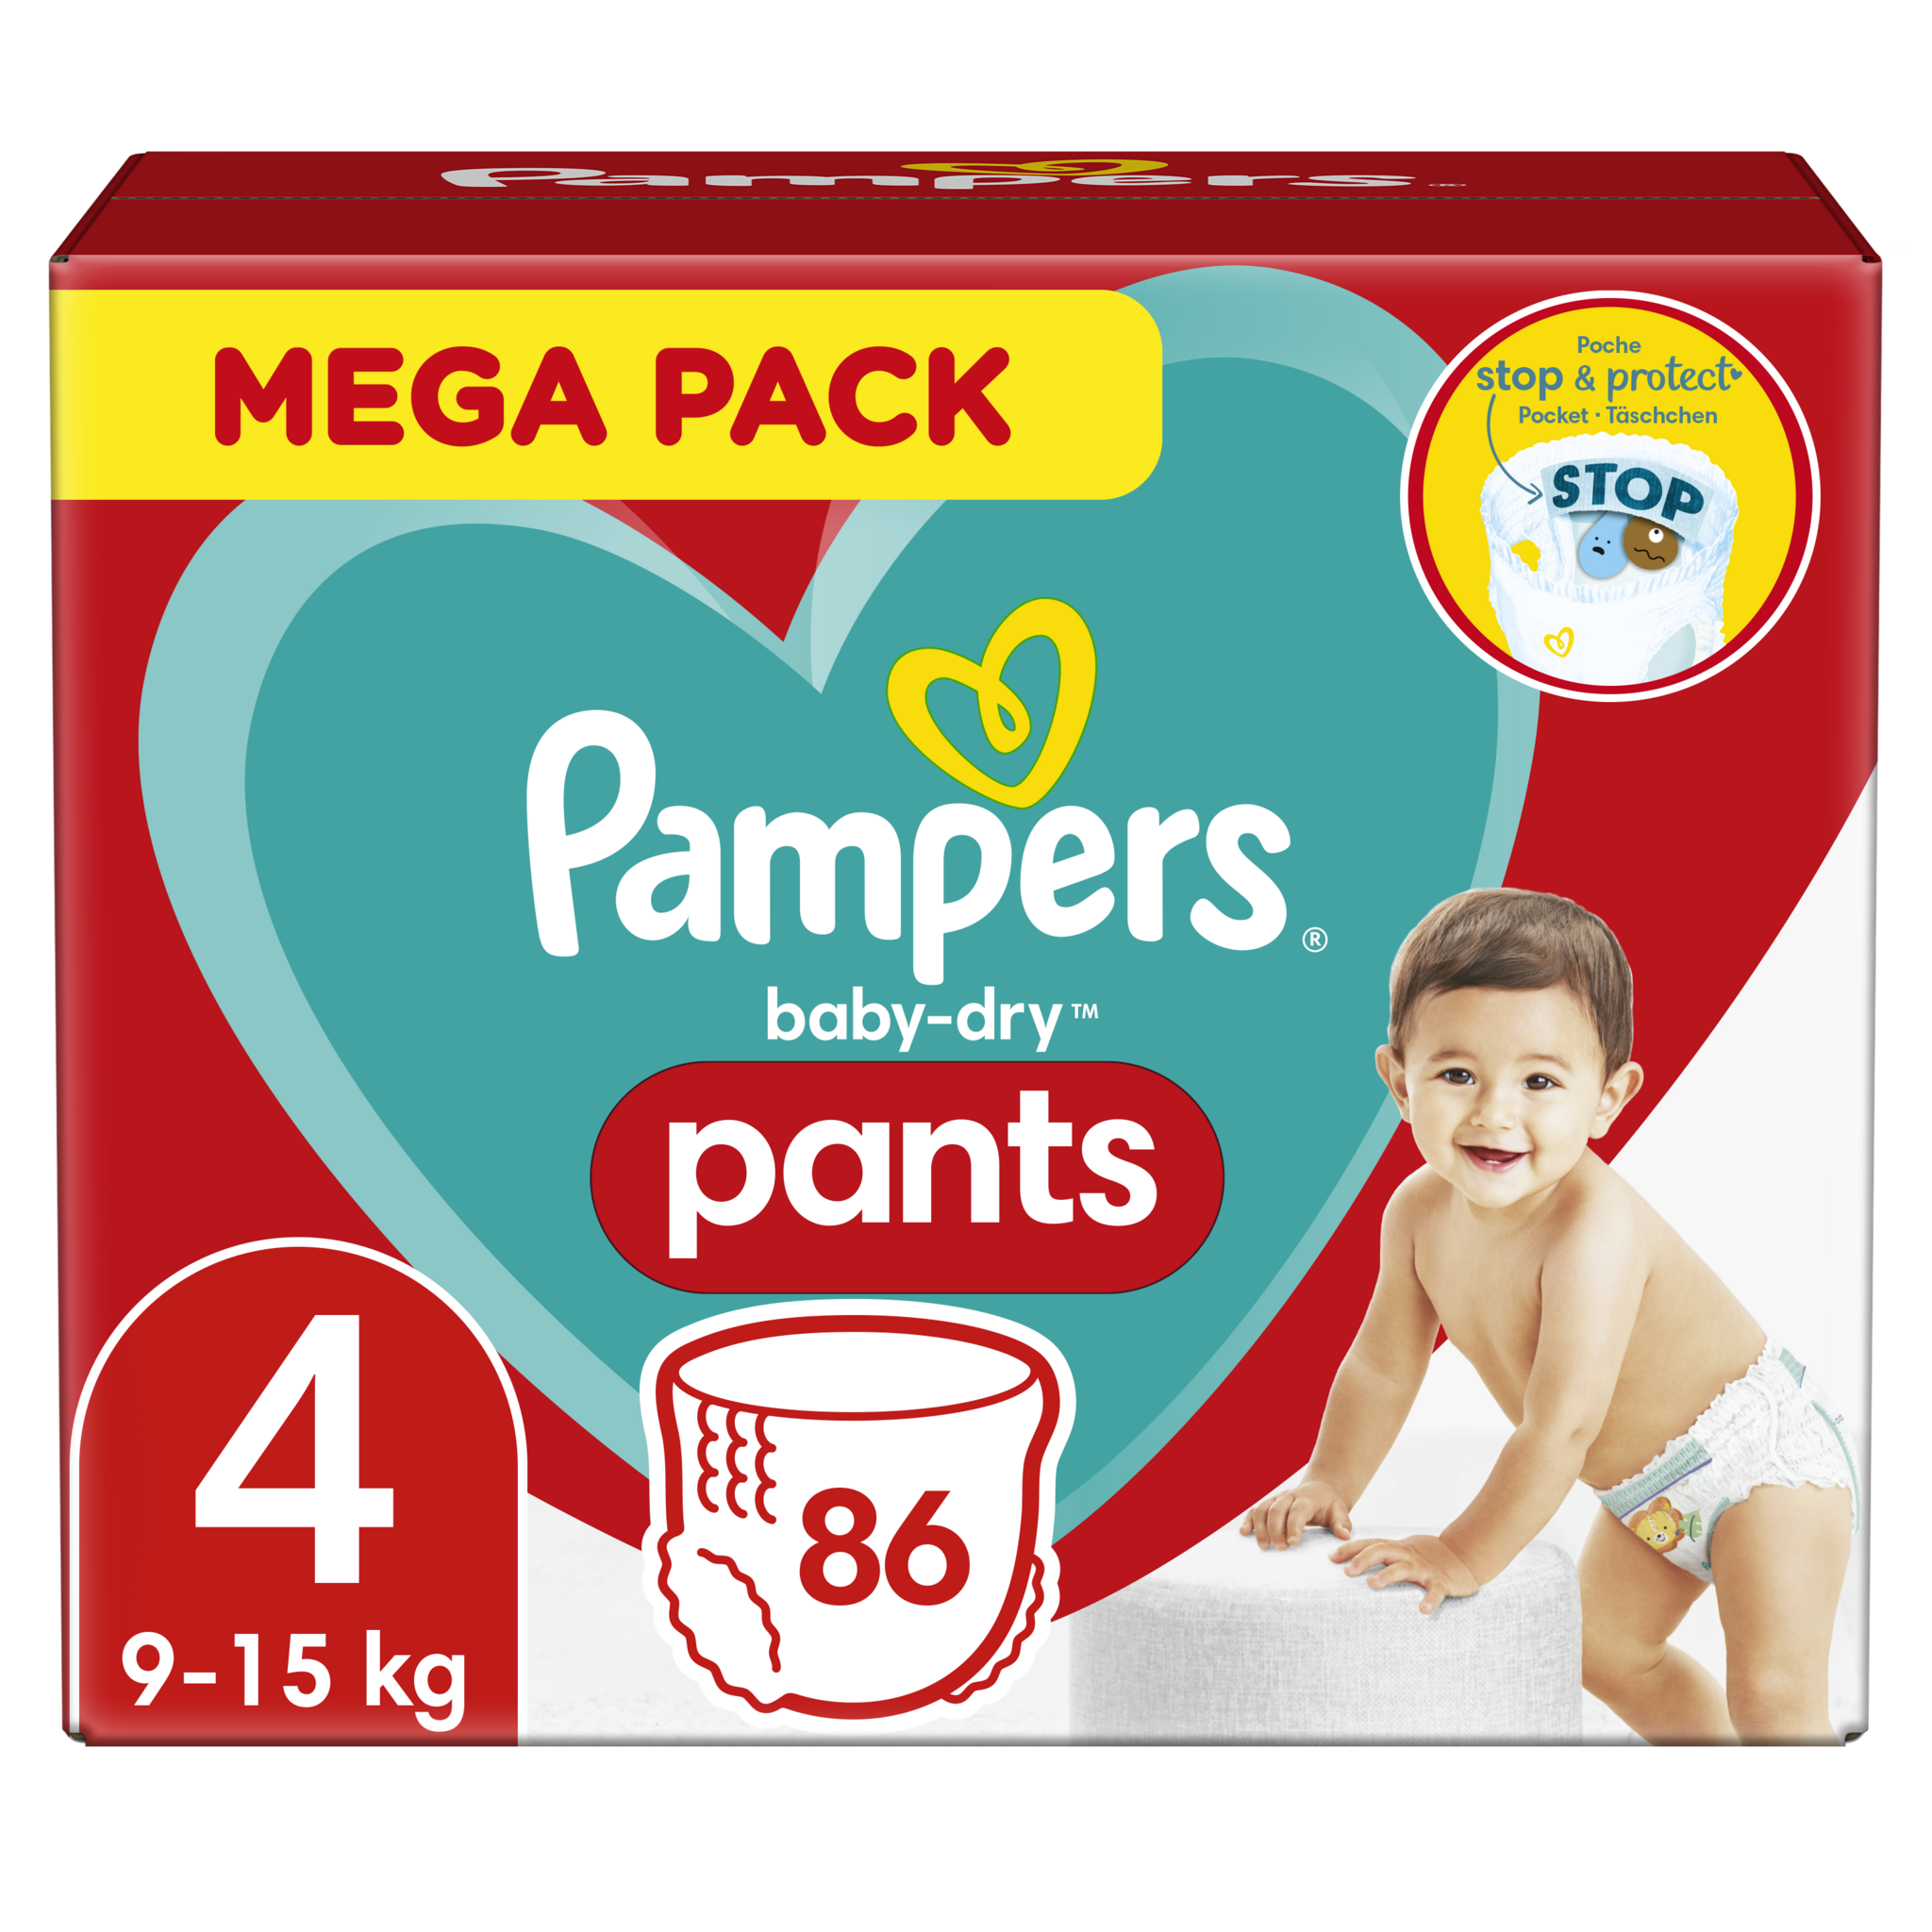 PAMPERS Pants baby-dry couche culotte taille 4 ( 9-15kg ) 86 couches pas  cher 